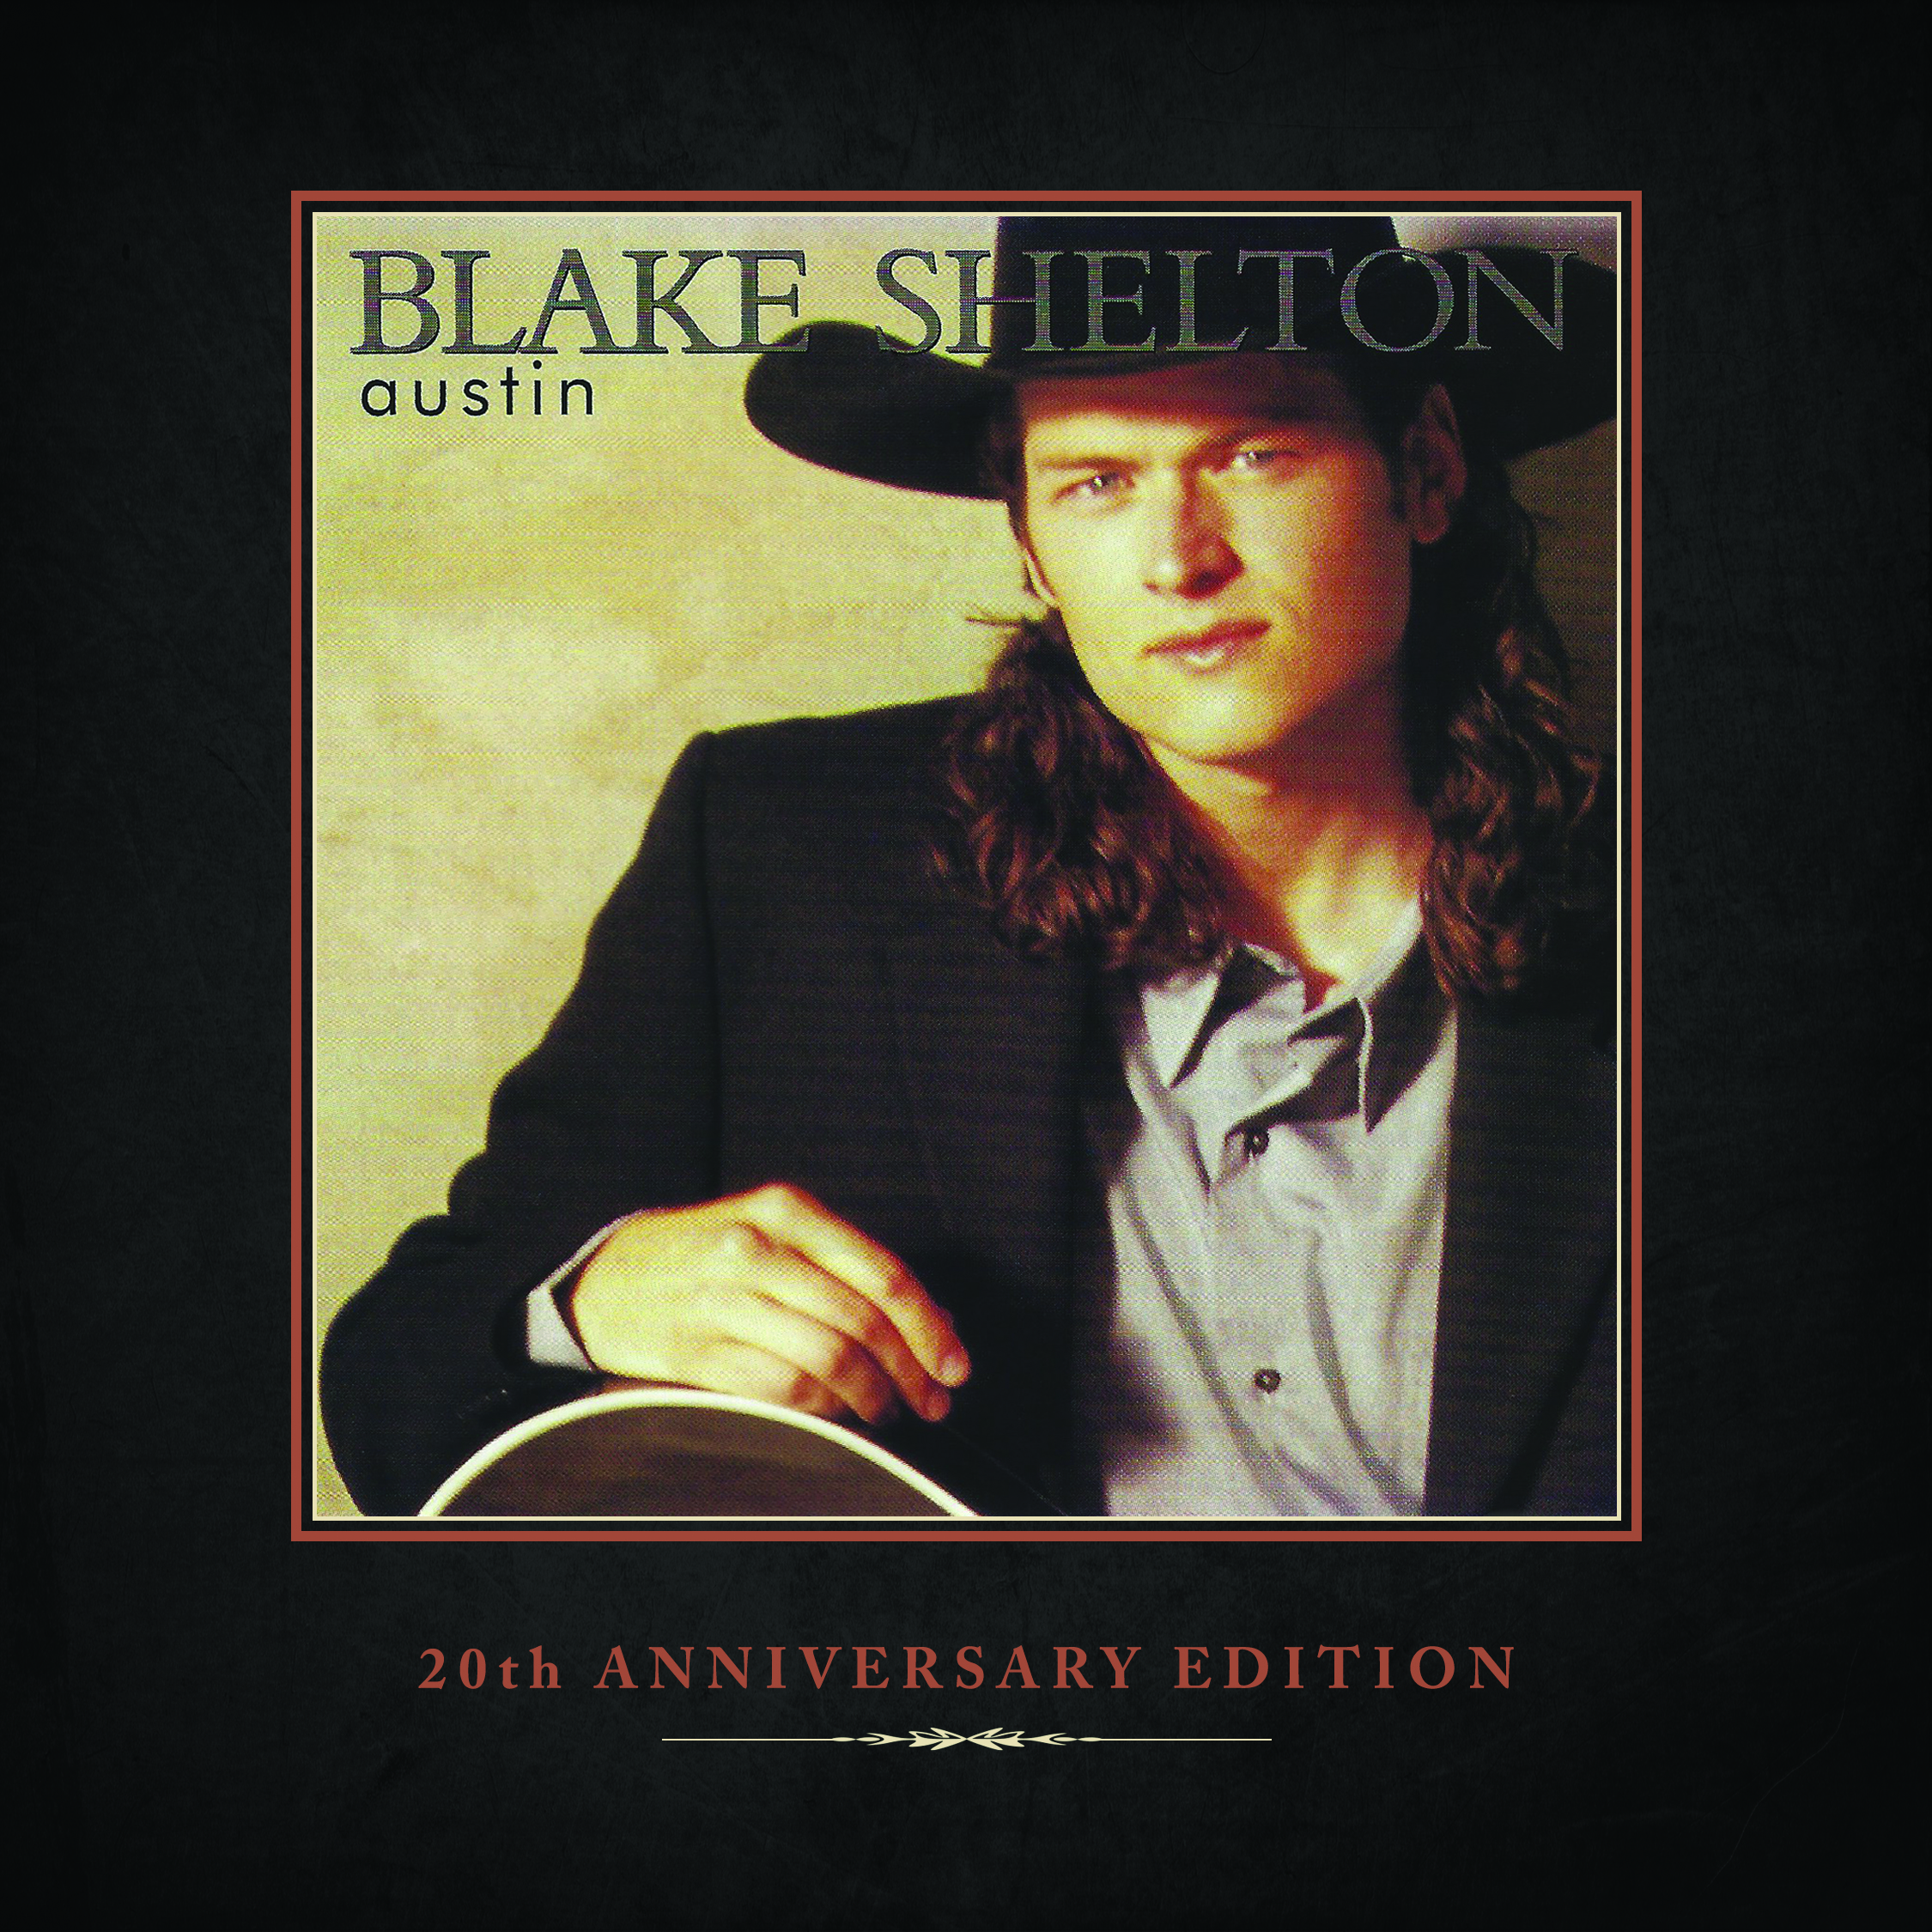 BLAKE SHELTON TO CELEBRATE 20TH ANNIVERSARY OF “AUSTIN” WITH SPECIAL VINYL RELEASE